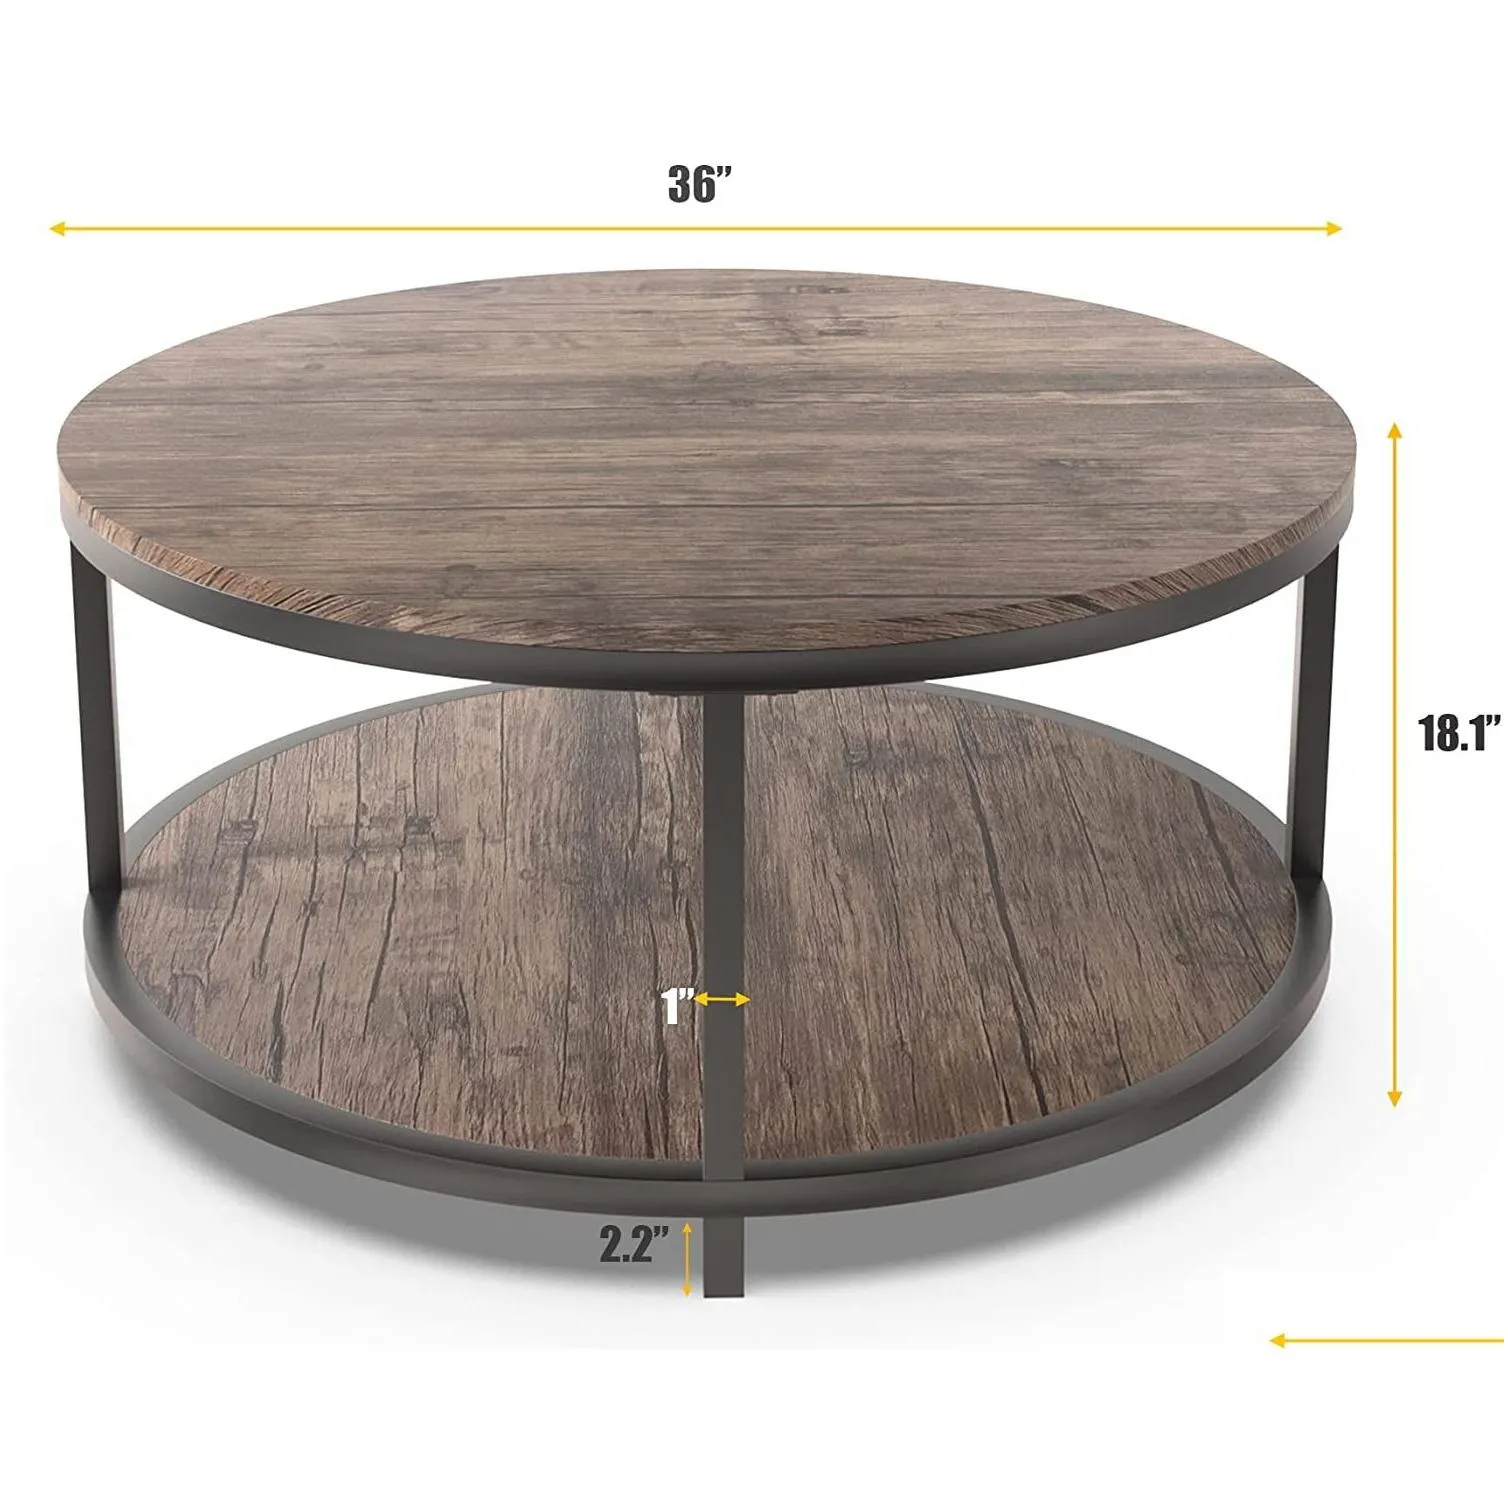 36 inches Round Coffee Table Rustic Wooden Surface Top Sturdy Metal Legs Industrial Sofa Table for Living Room Modern Design Home Furniture with Storage Open